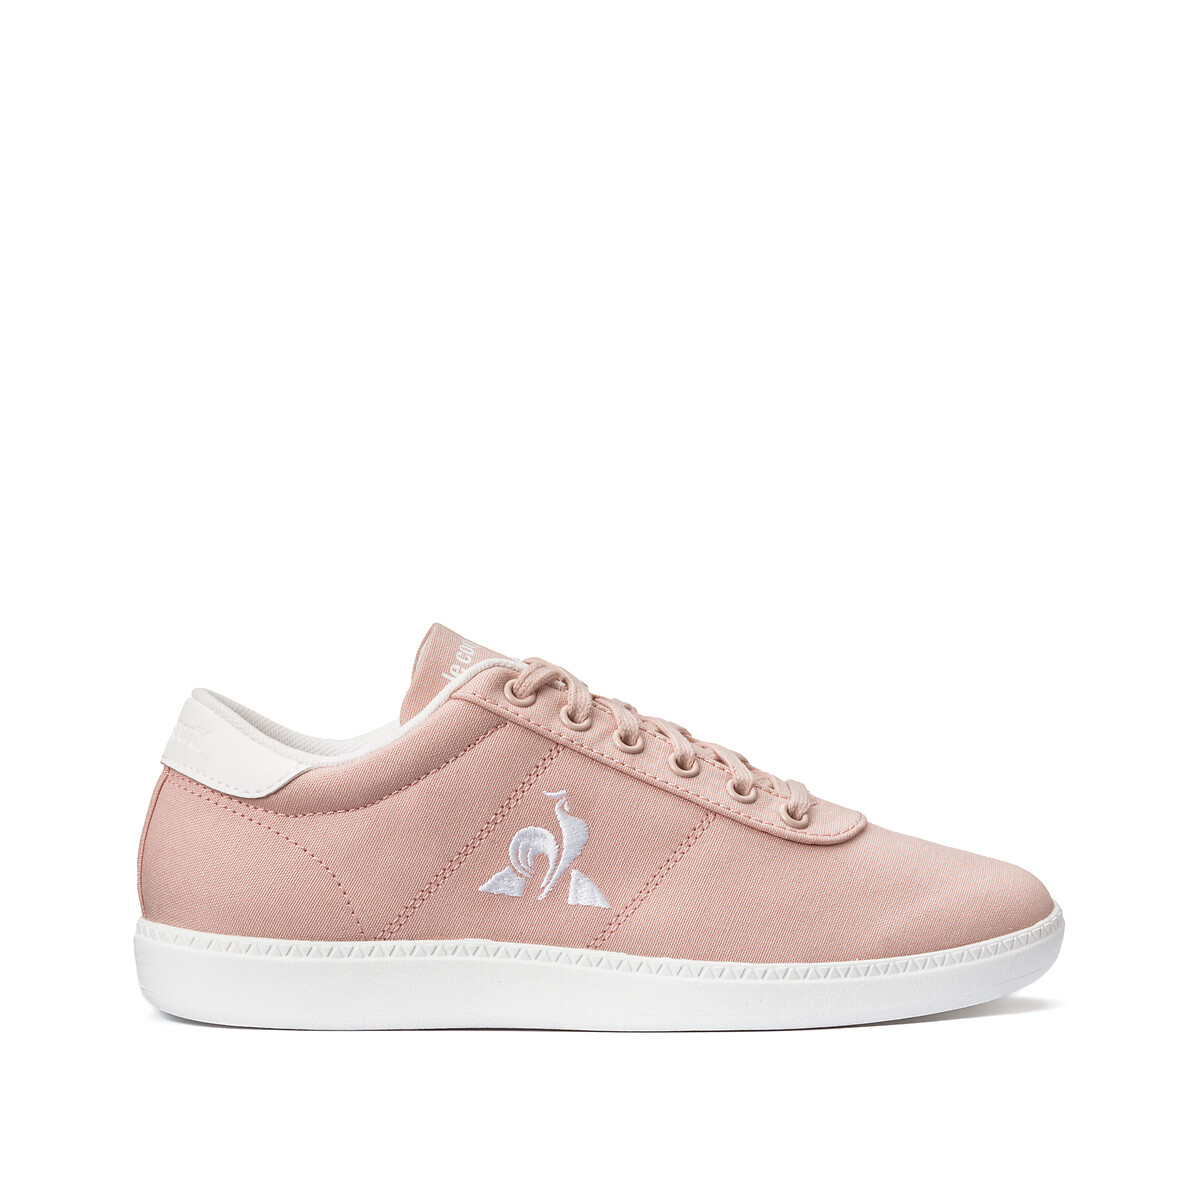 heuvel zuur Rentmeester Lage sneakers court one roze Le Coq Sportif | La Redoute